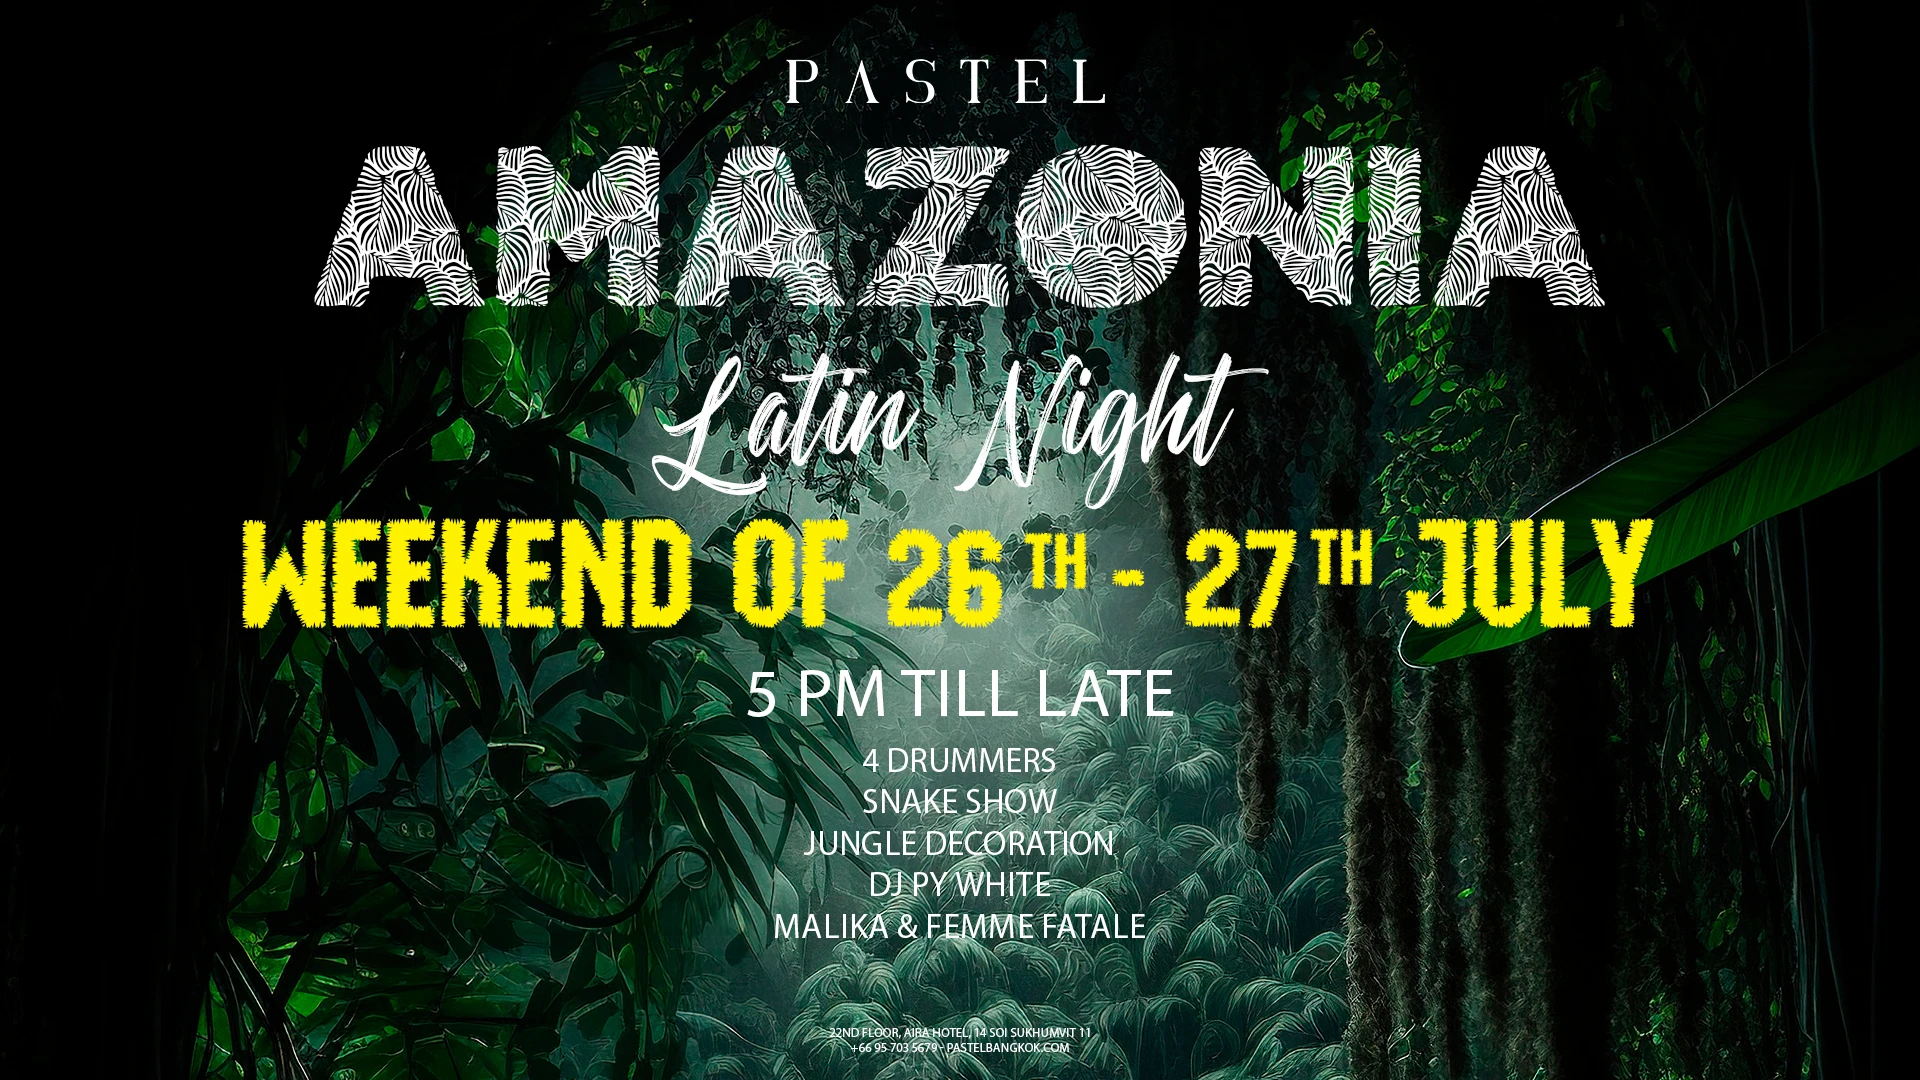 Amazonia's event banner landscape on week-end 26th and 27th July